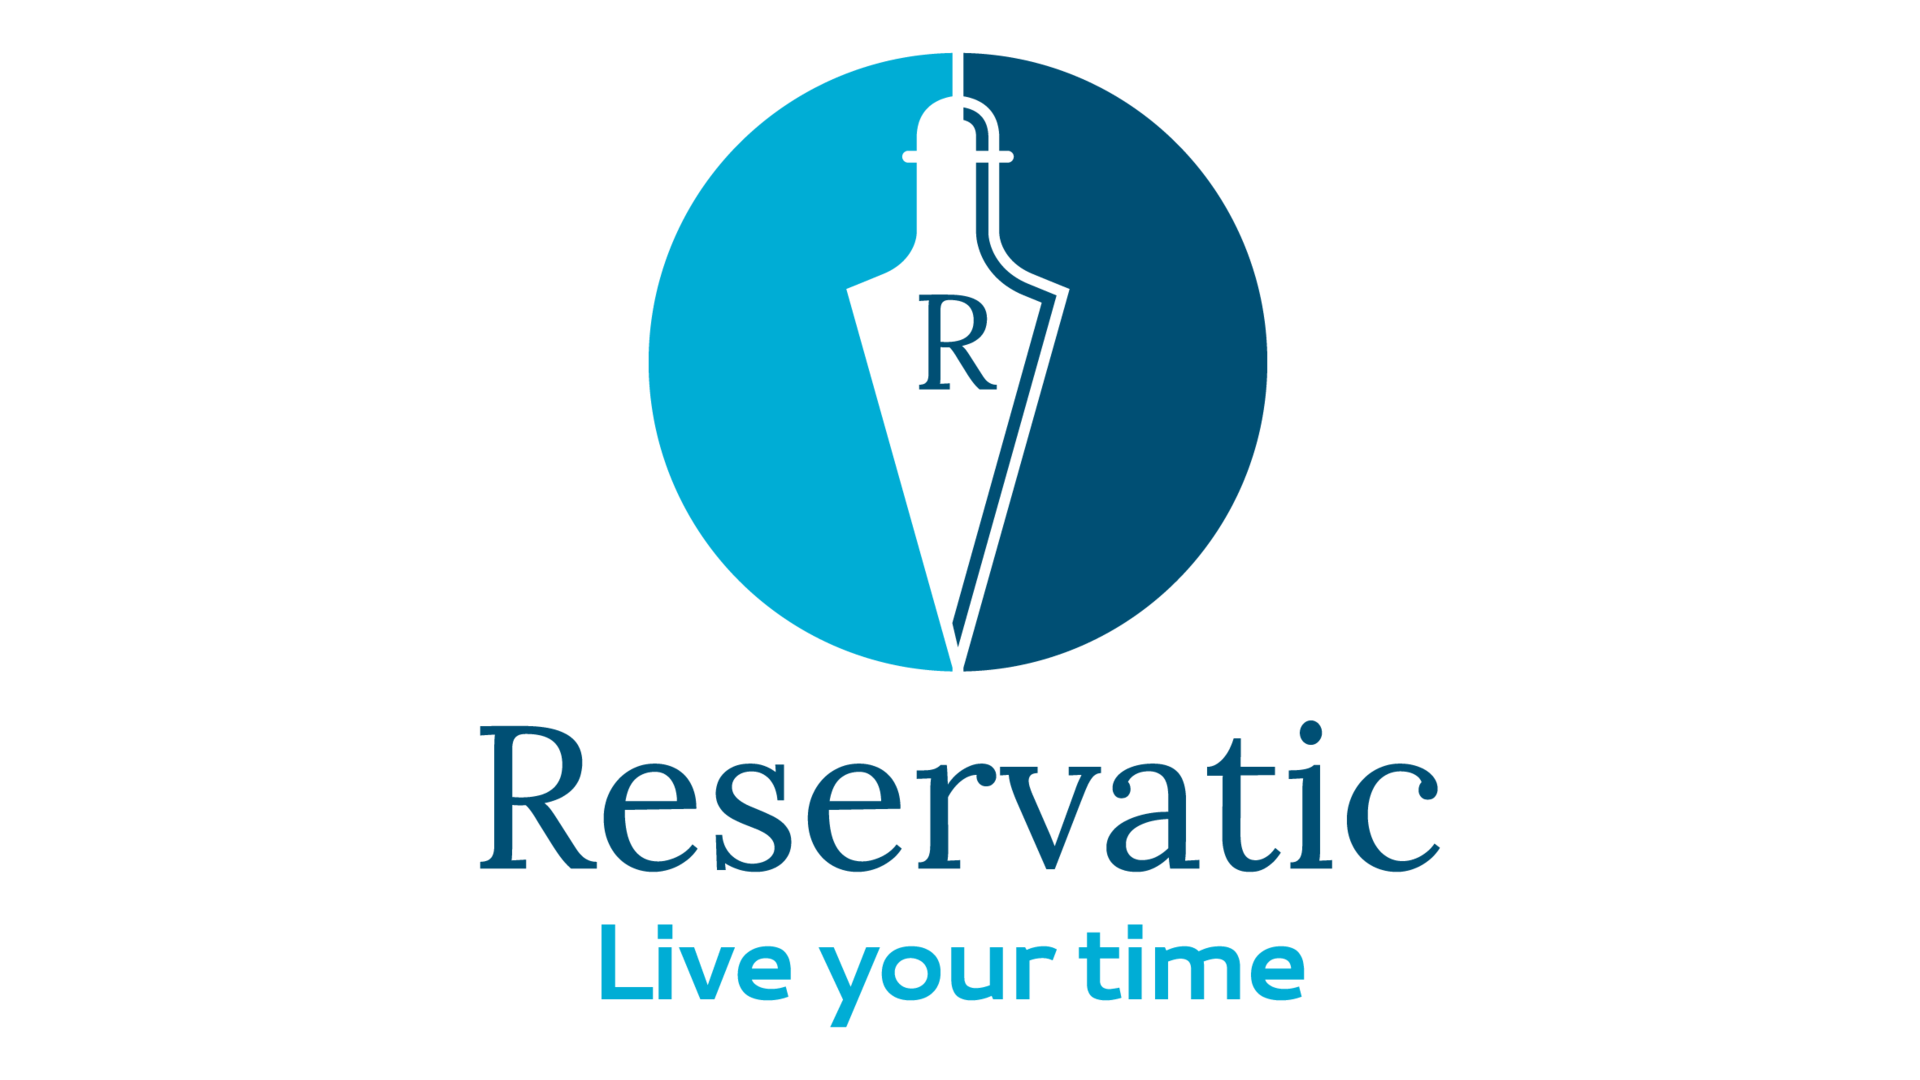 Reservatic's mission